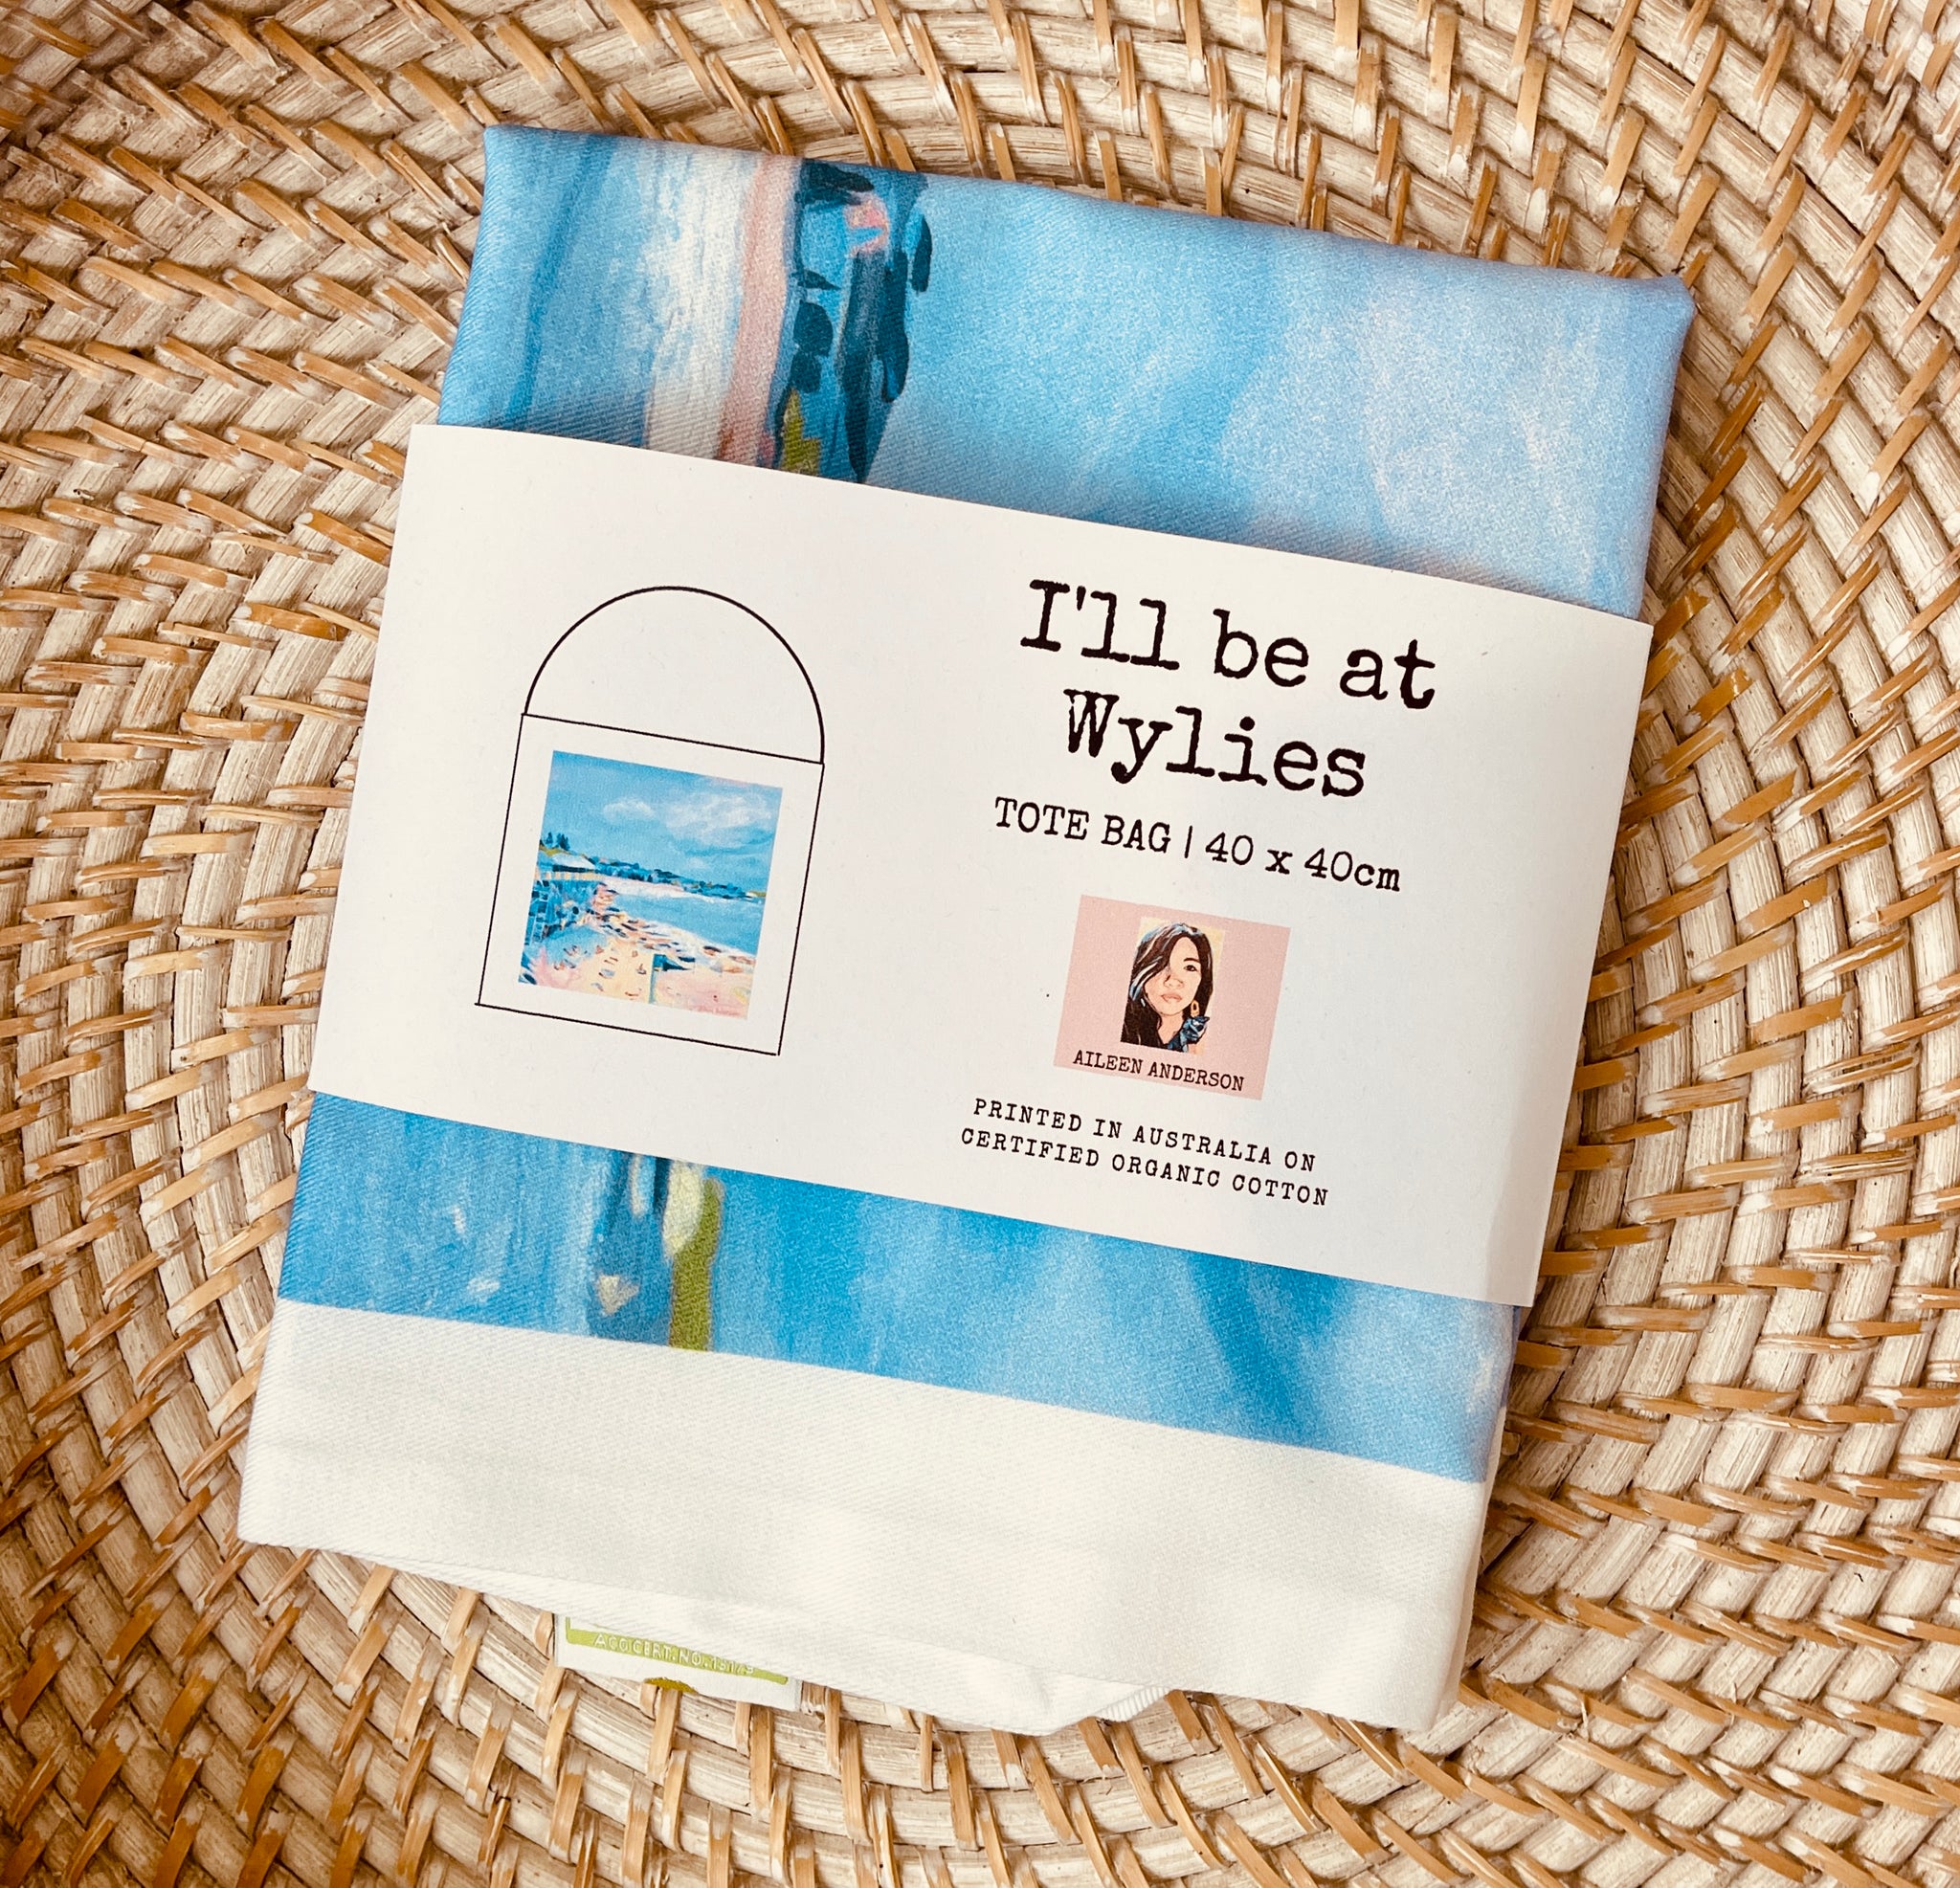 I'll be at Wylie's by Aileen Anderson Tote Bag